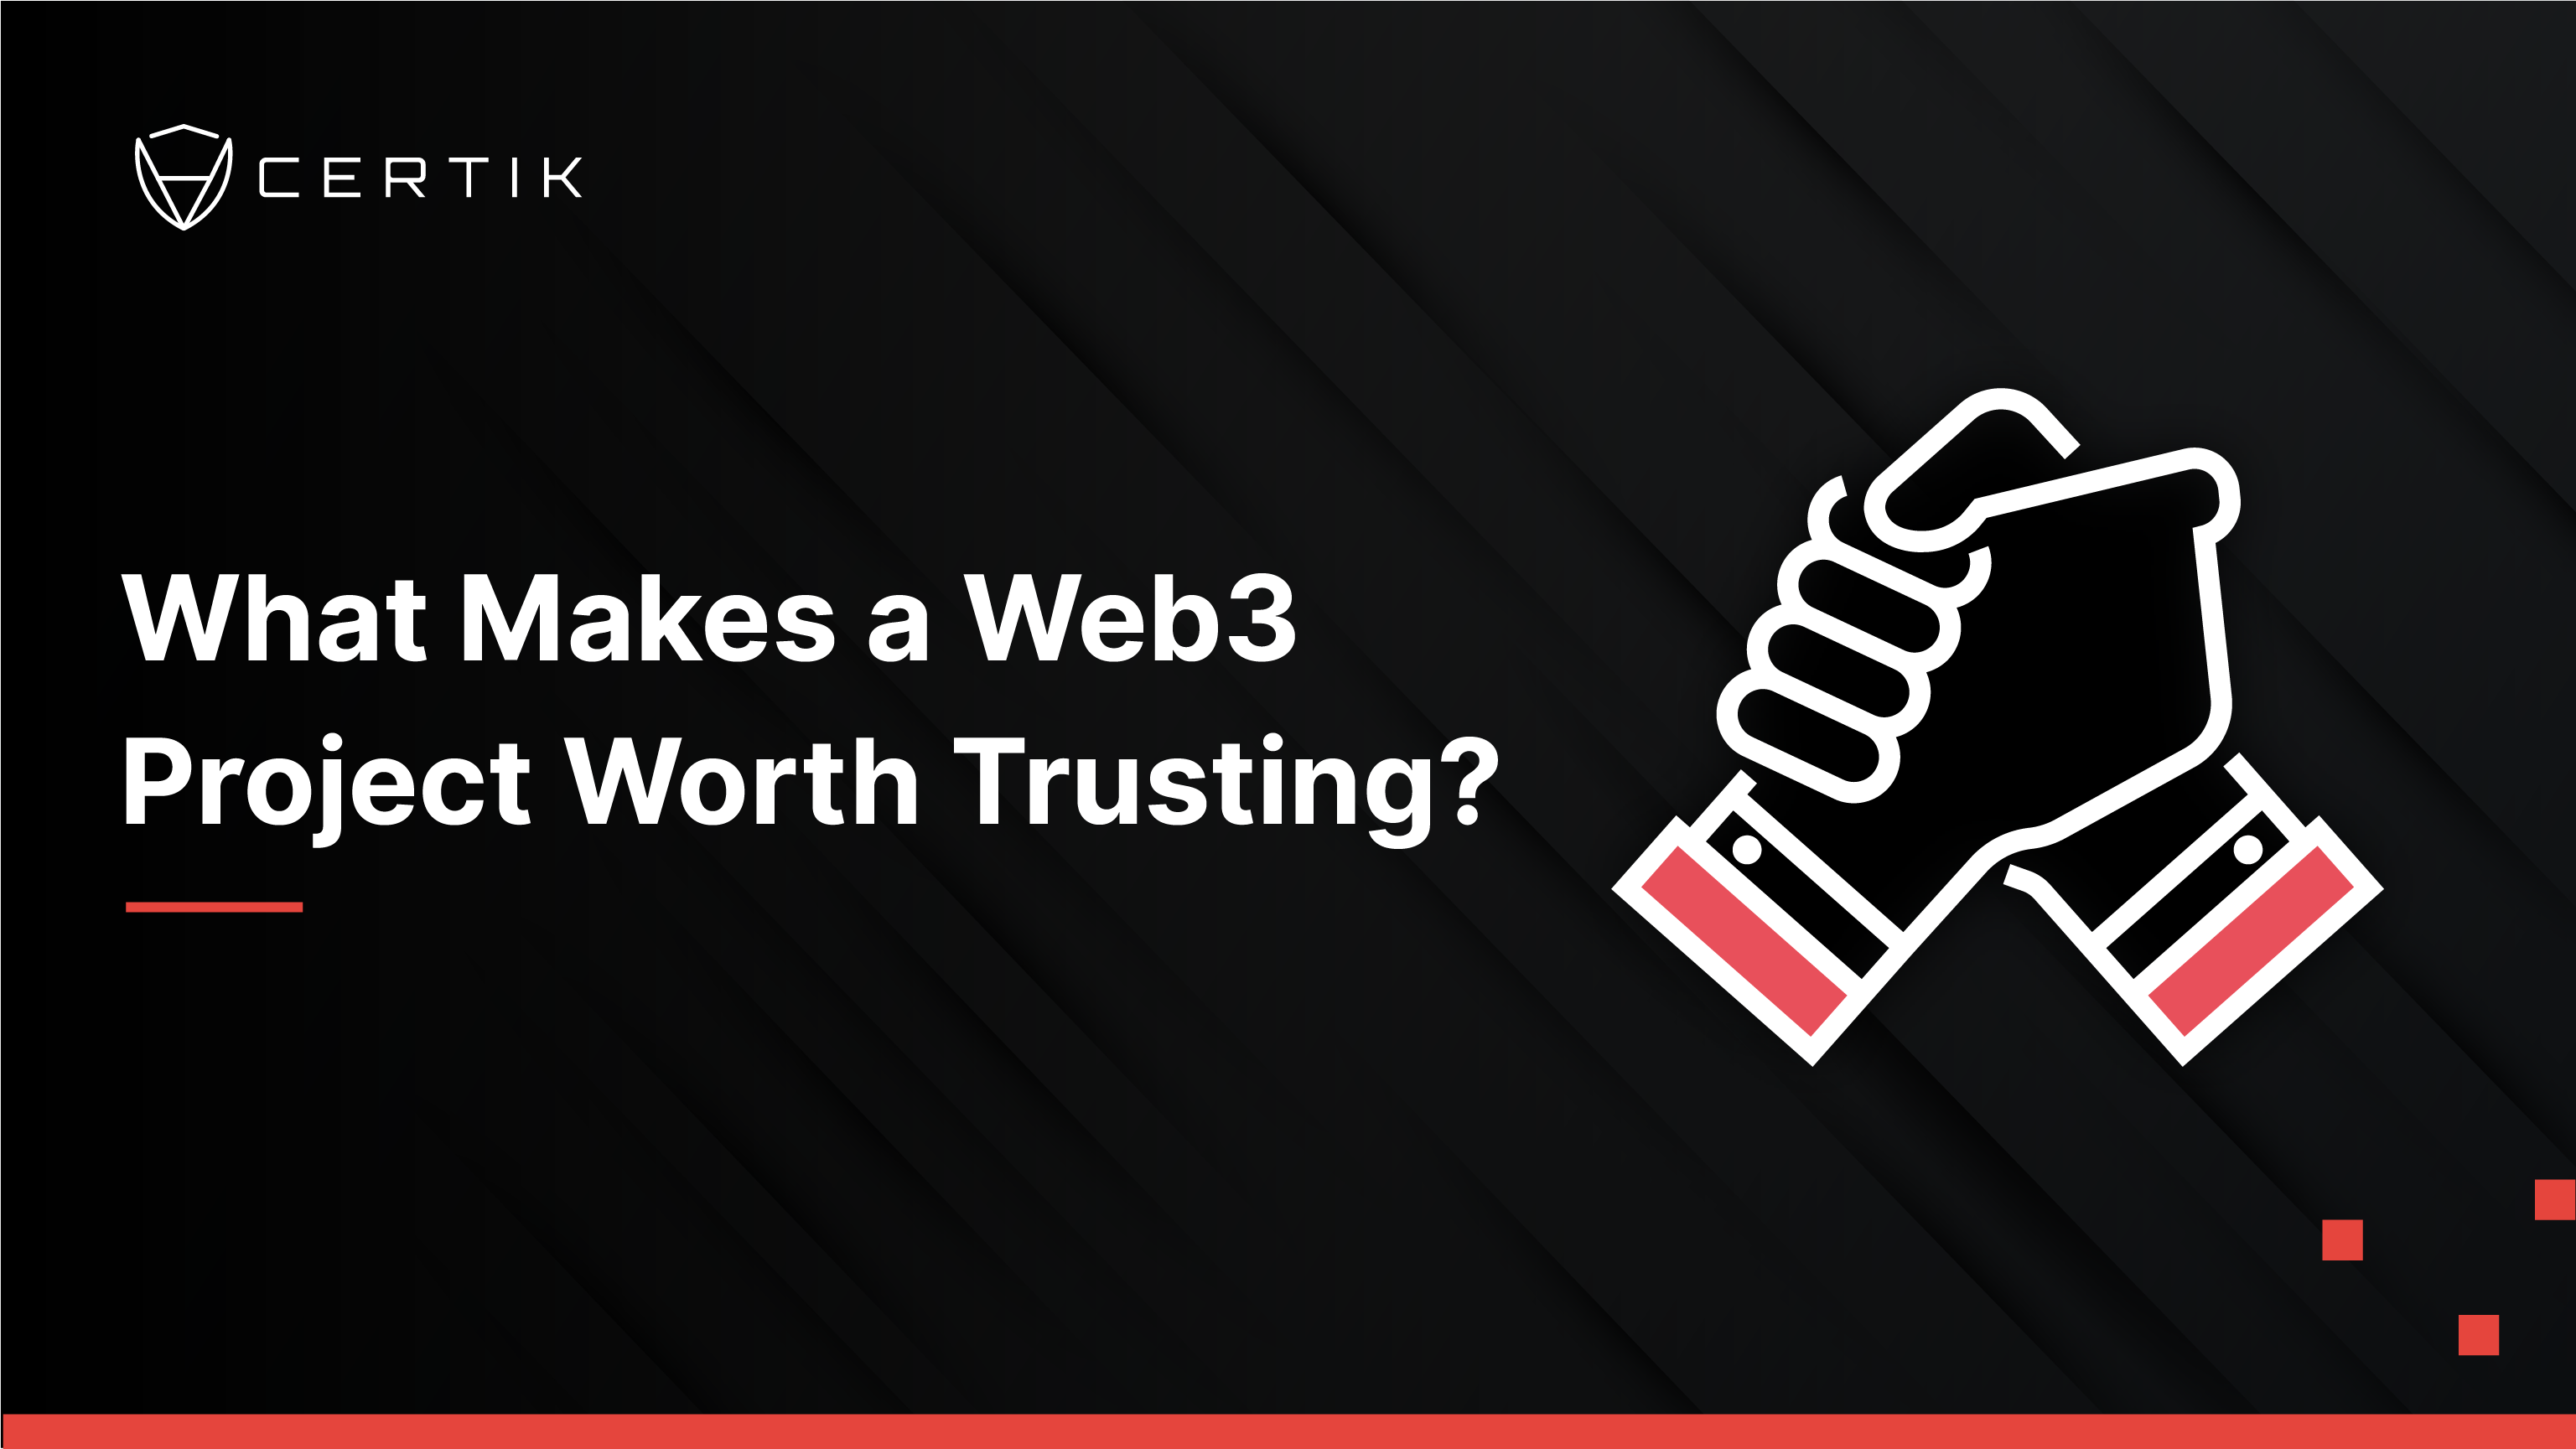 What Makes a Web3 Project Worth Trusting?